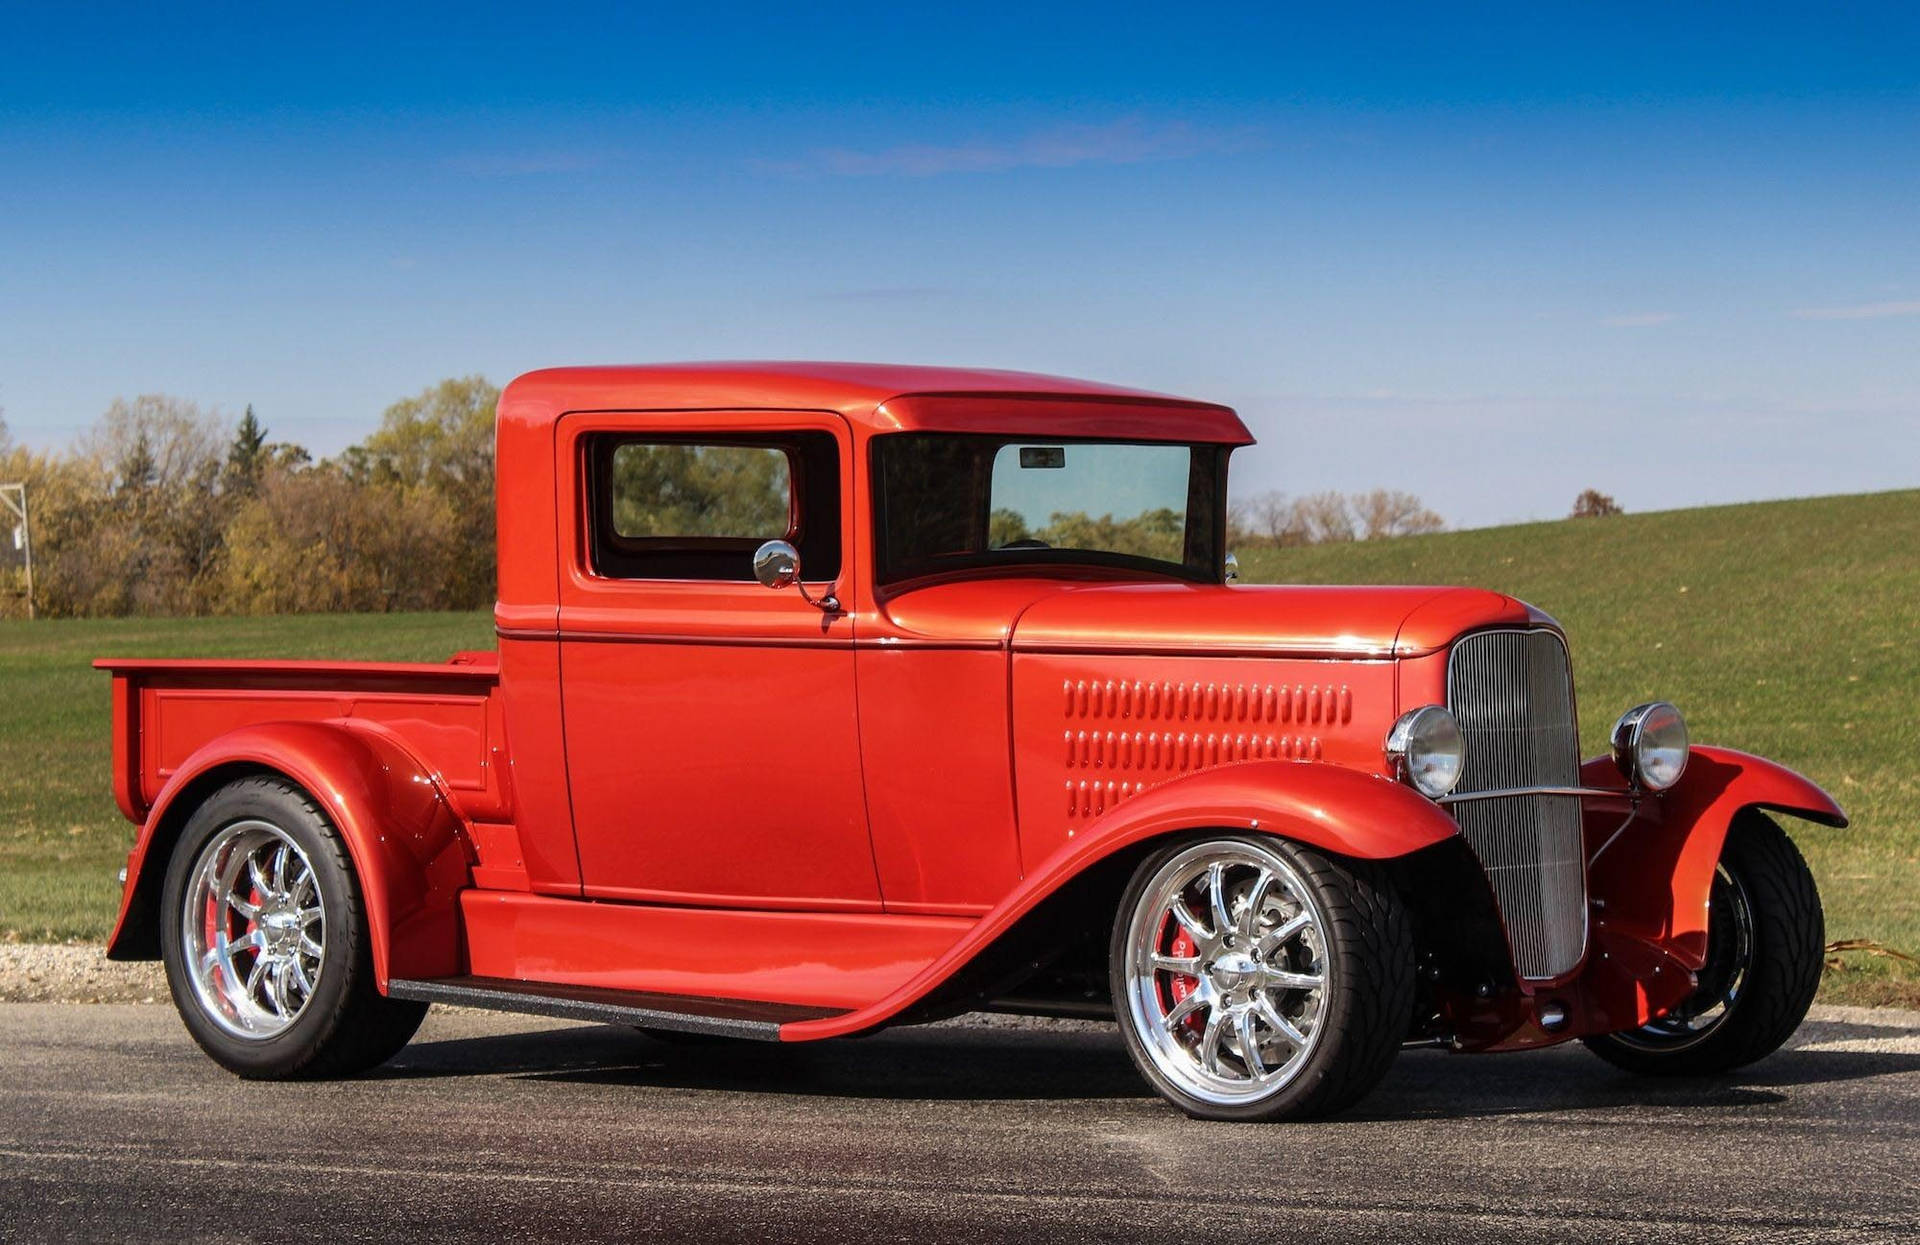 1935 Red Old Ford Truck Background